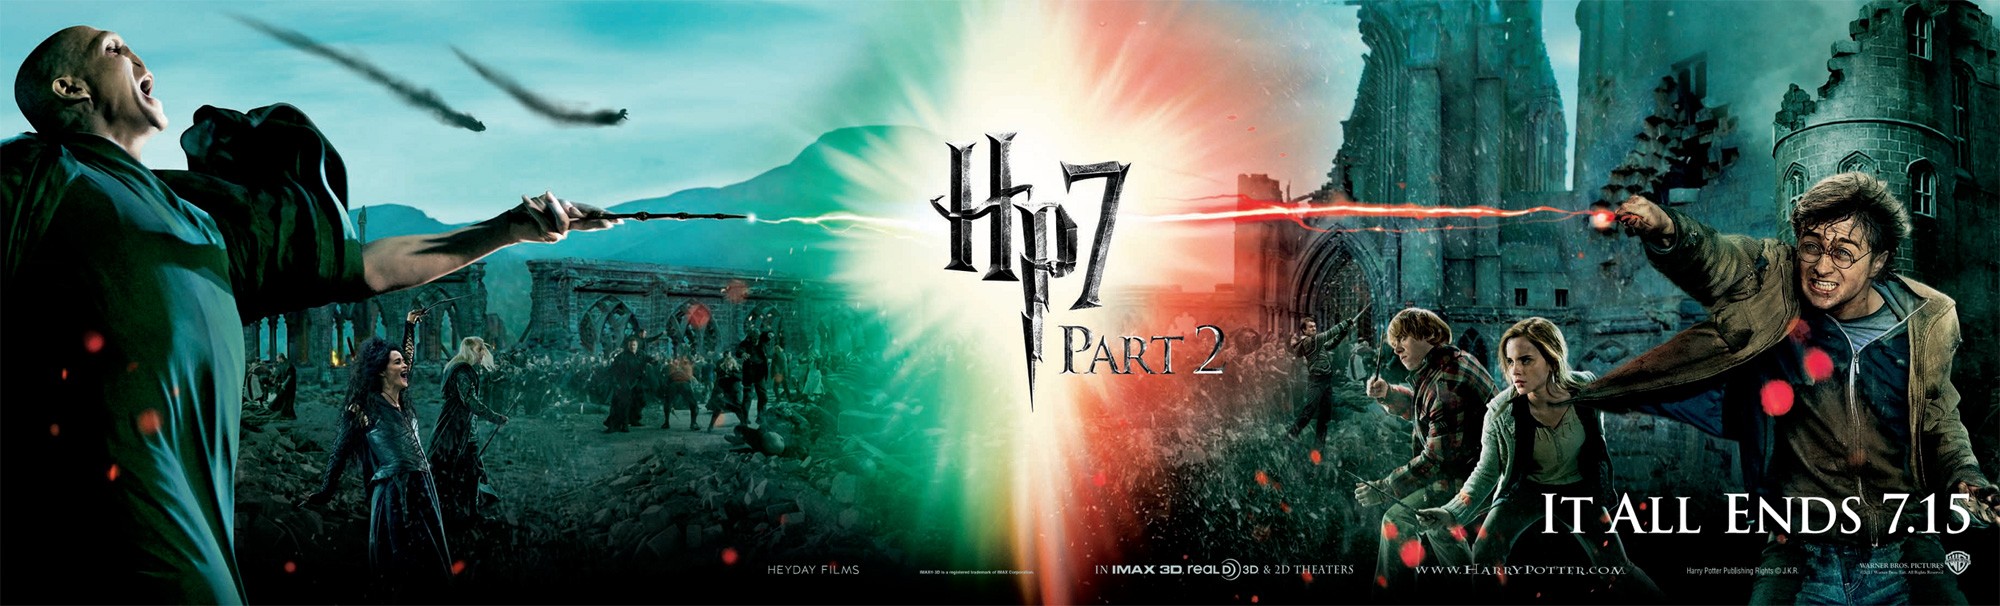 Mega Sized Movie Poster Image for Harry Potter and the Deathly Hallows: Part 2 (#24 of 28)